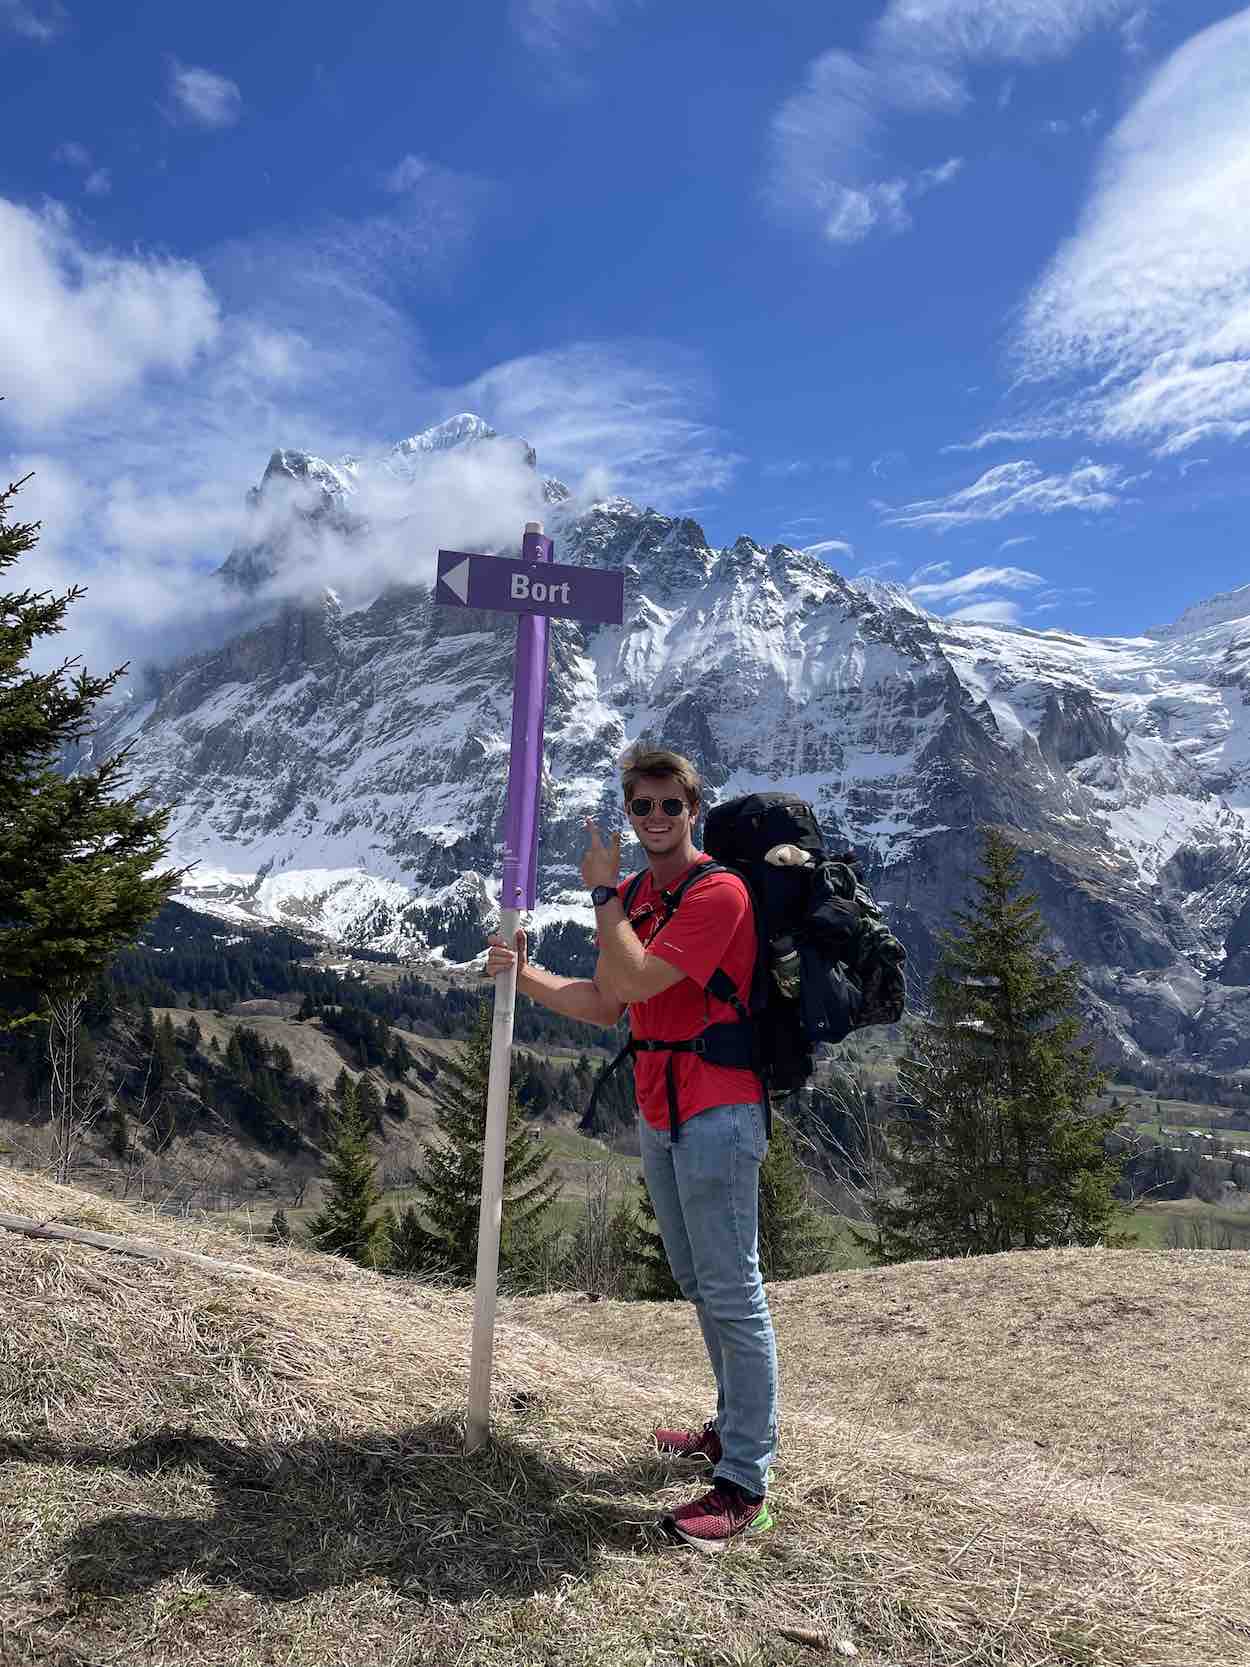 Matt Knerr hikes the Swiss Alps in Grindelwald, Switzerland. Submitted photo